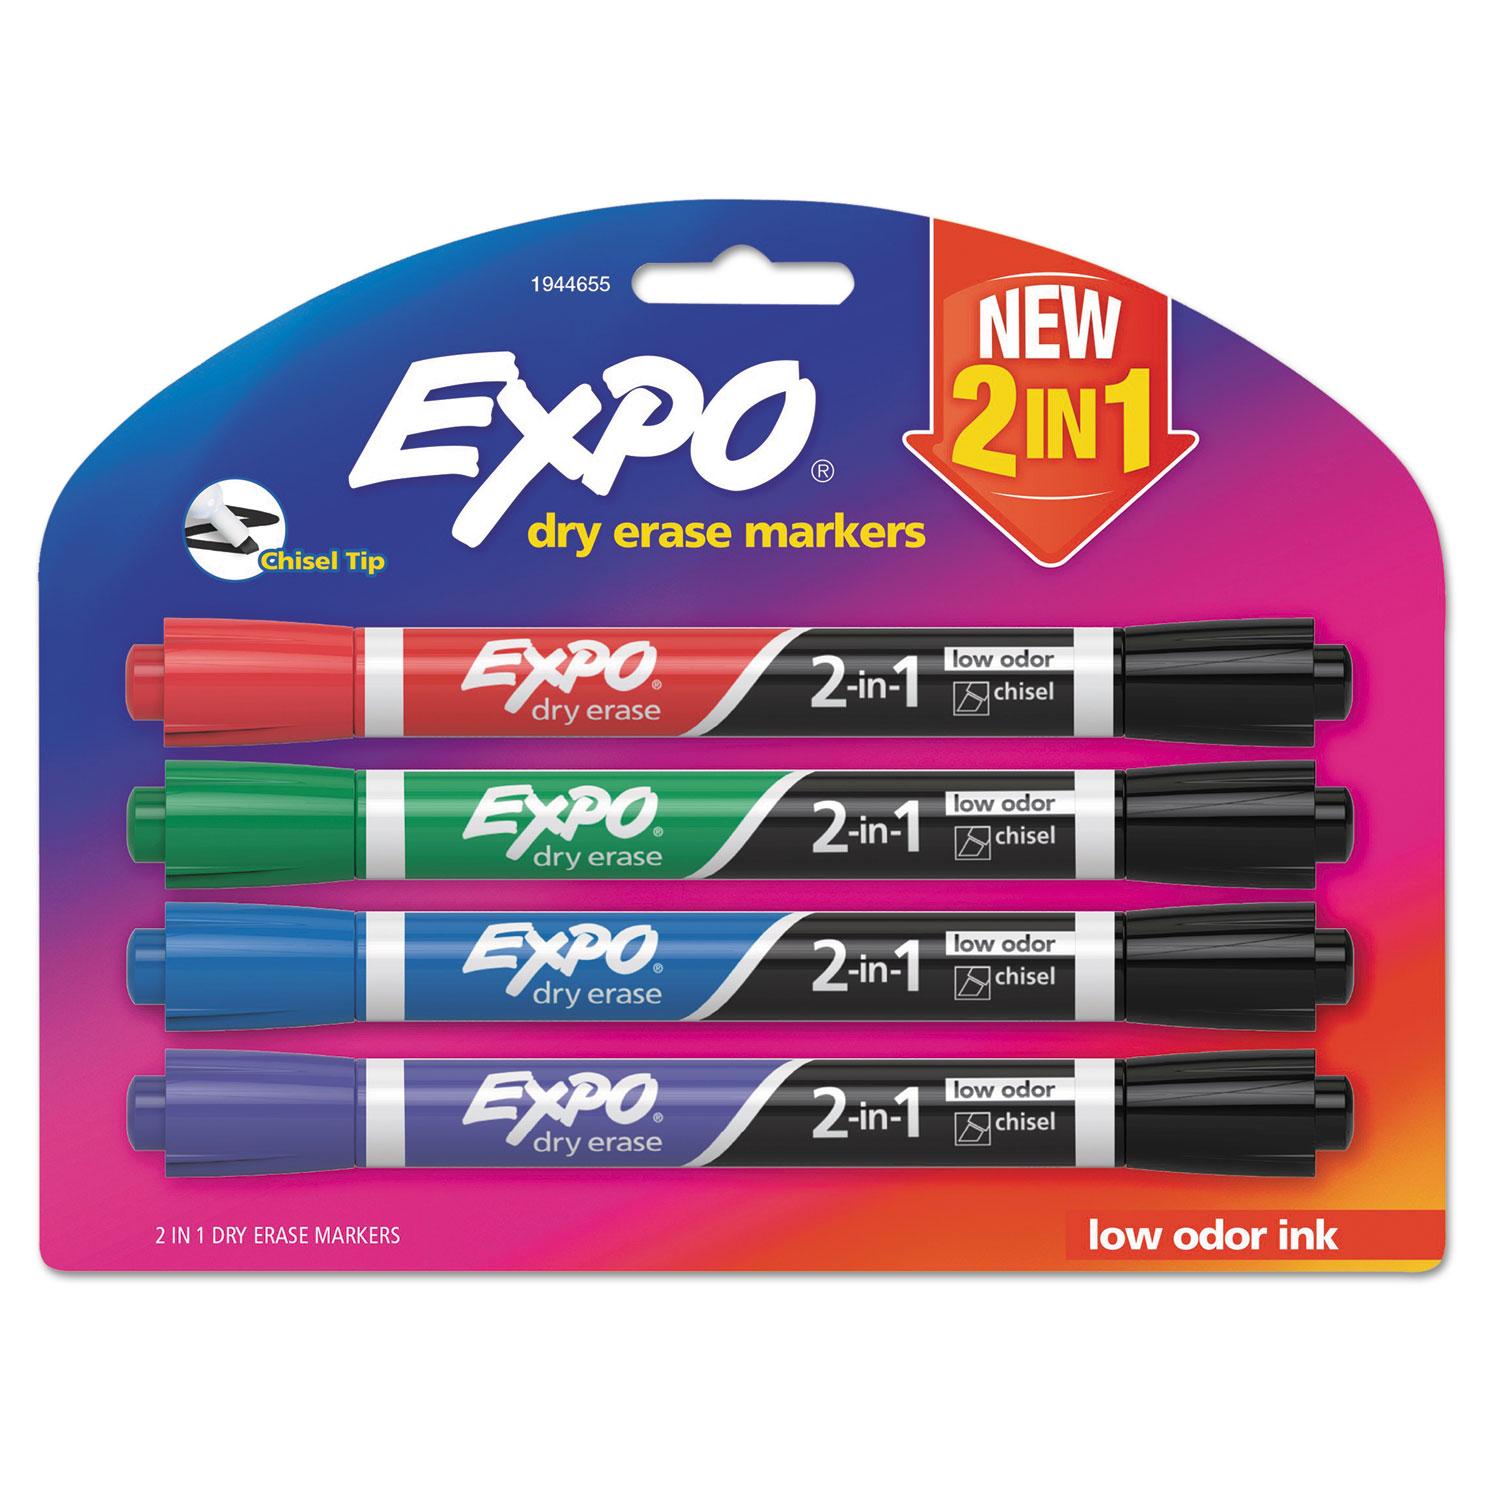  EXPO 1944655 2-in-1 Dry Erase Markers, Broad/Fine Chisel Tip, Assorted Colors, 4/Pack (SAN1944655) 